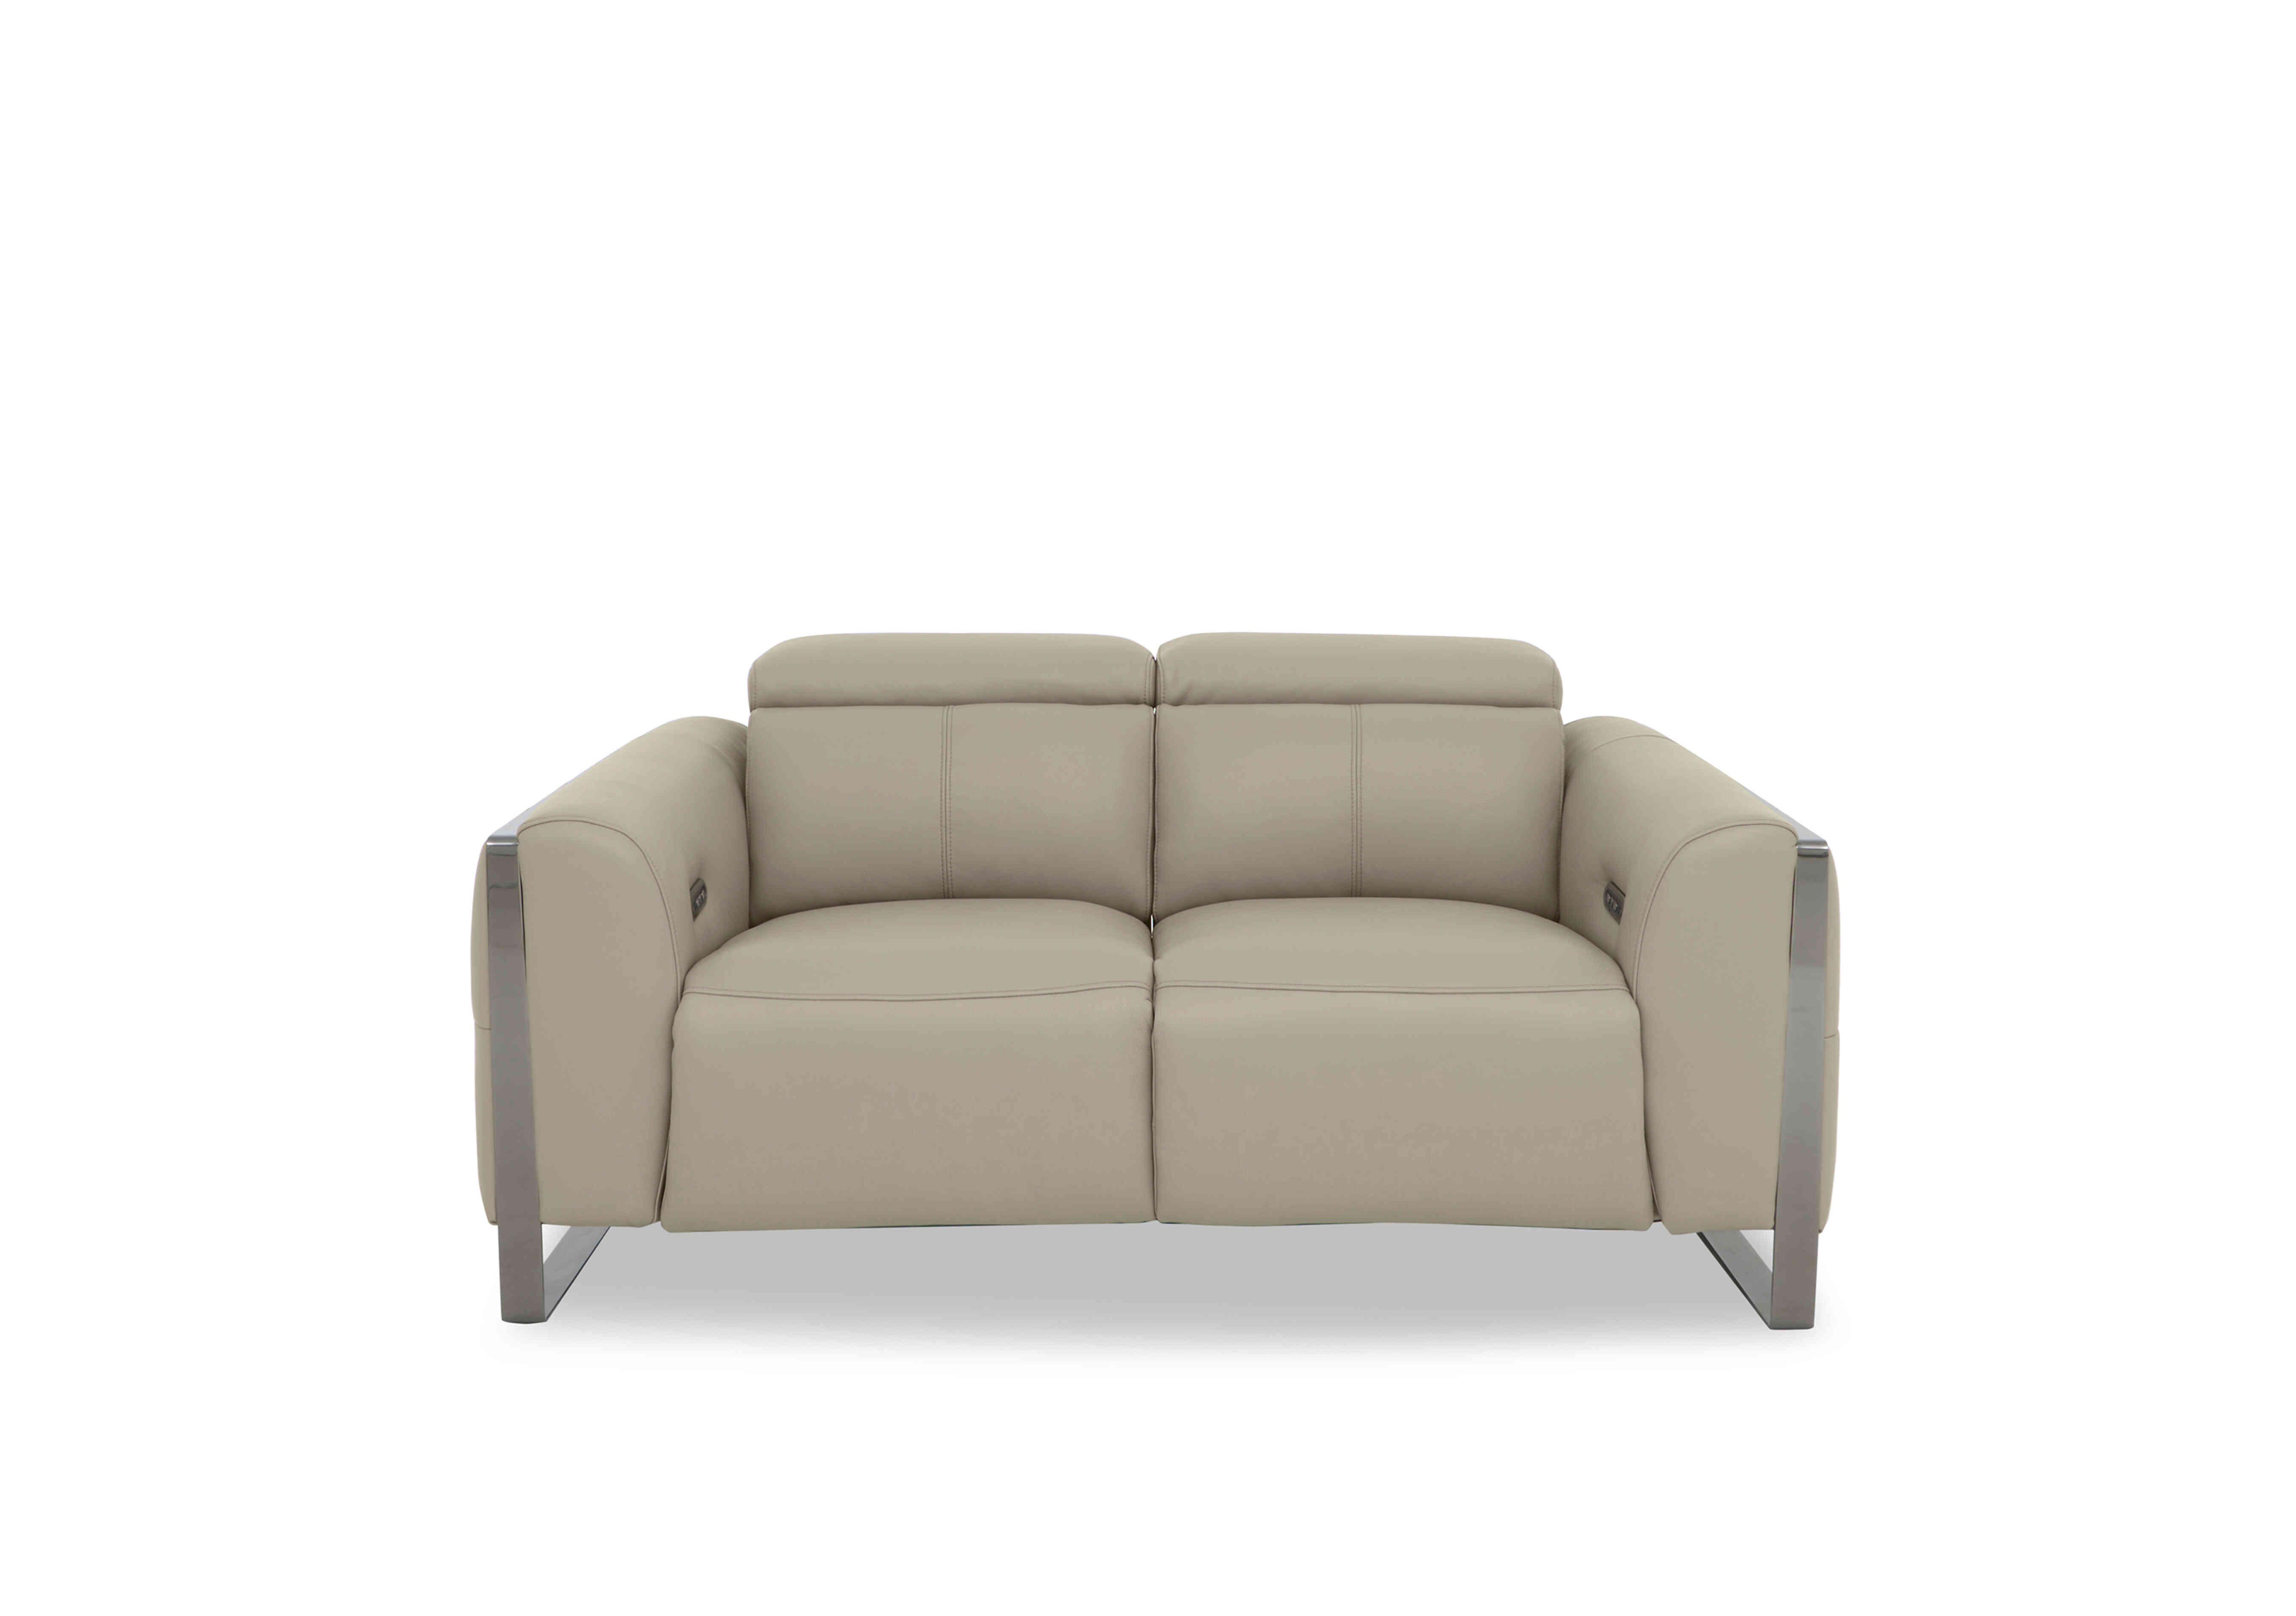 Gisella Leather 2 Seater Sofa in Cat-40/08 Oyster on Furniture Village